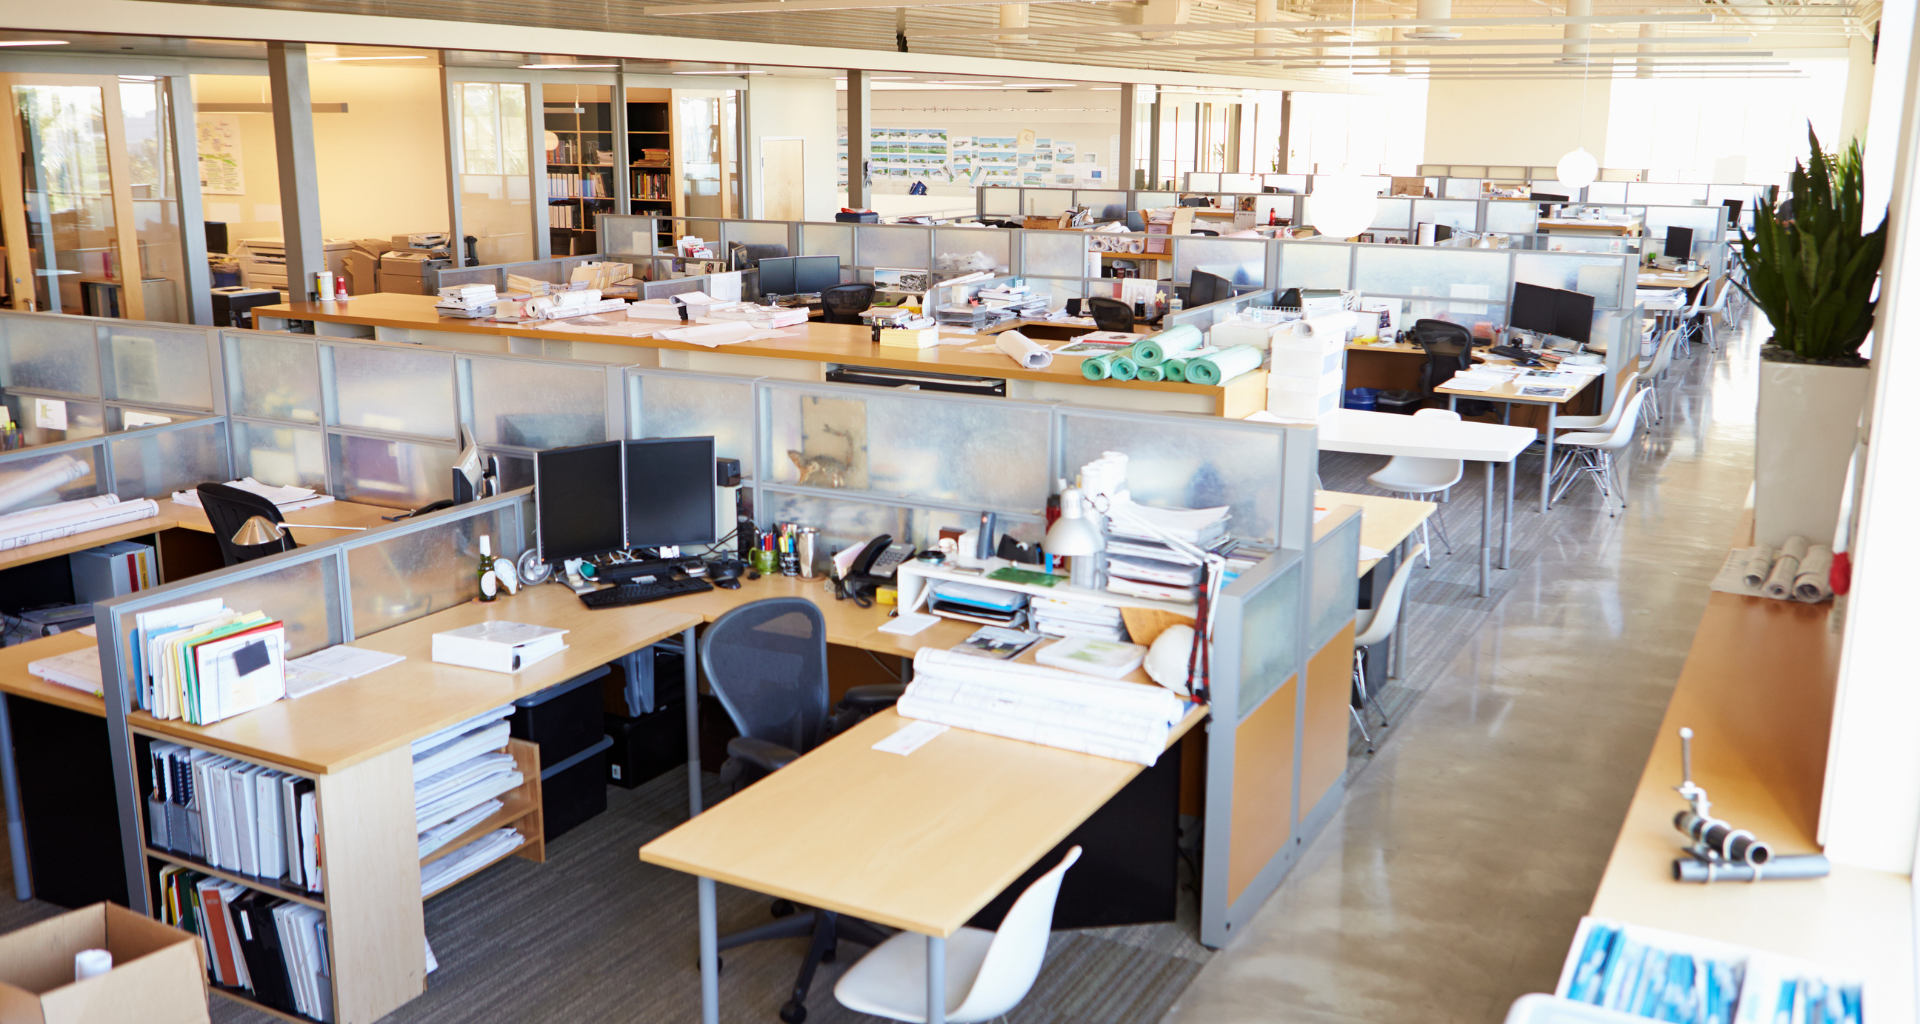 Downsizing the office - key considerations